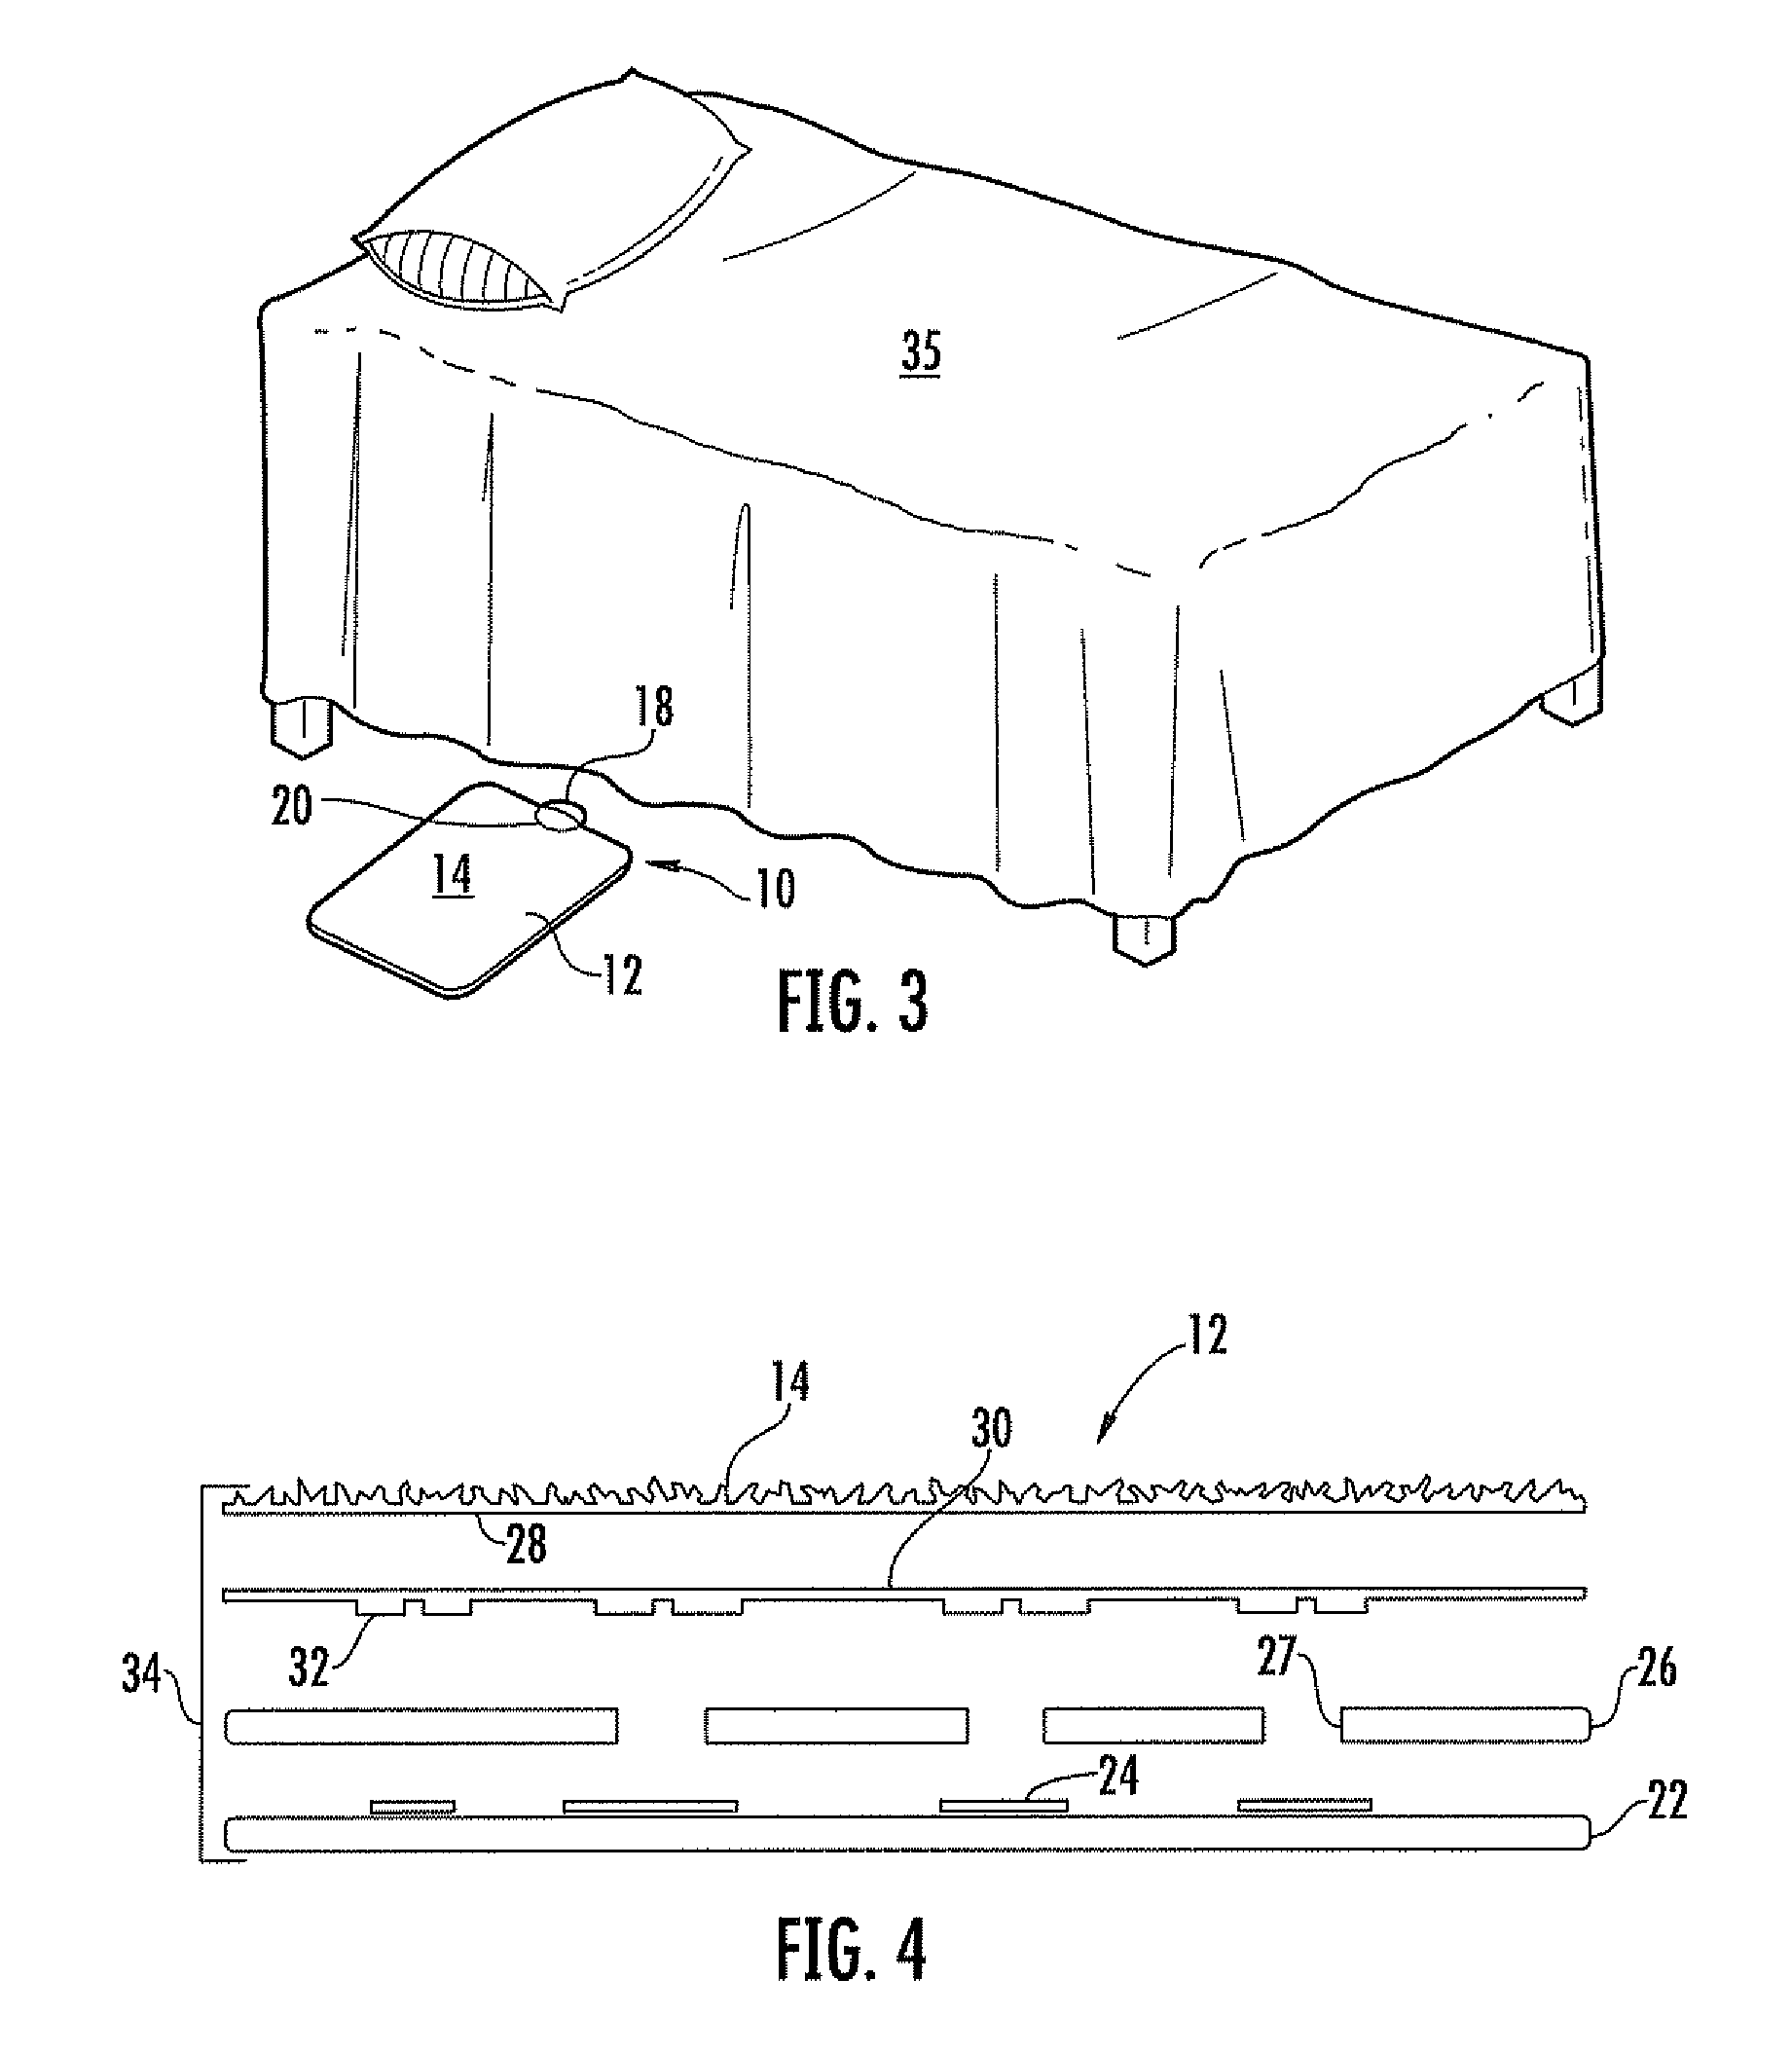 Lighting activation systems and methods